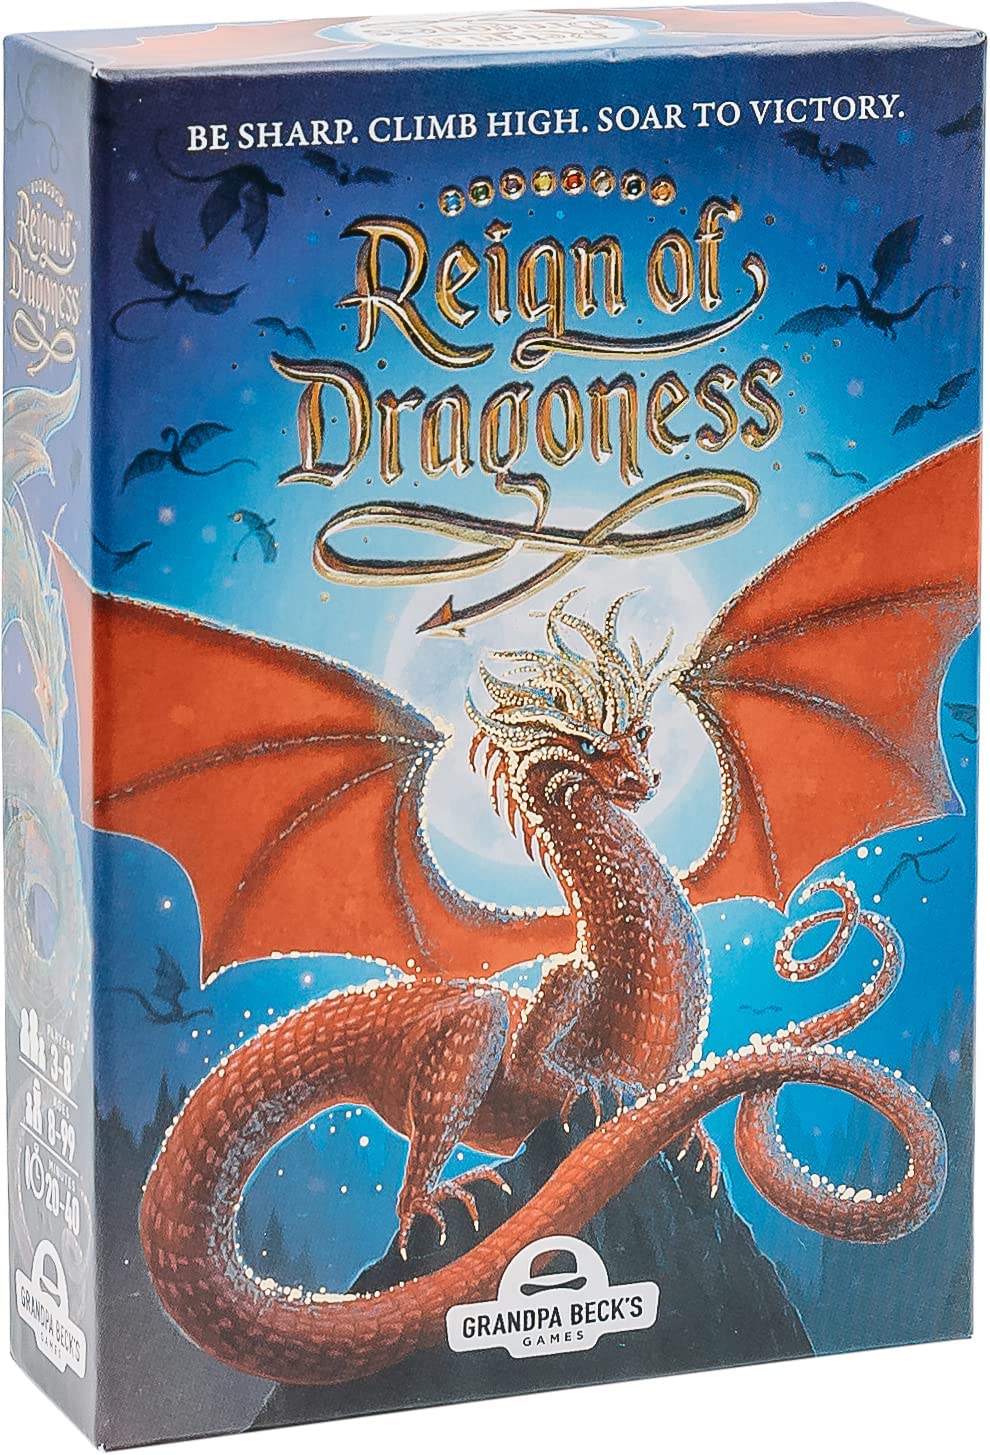 Reign of Dragoness